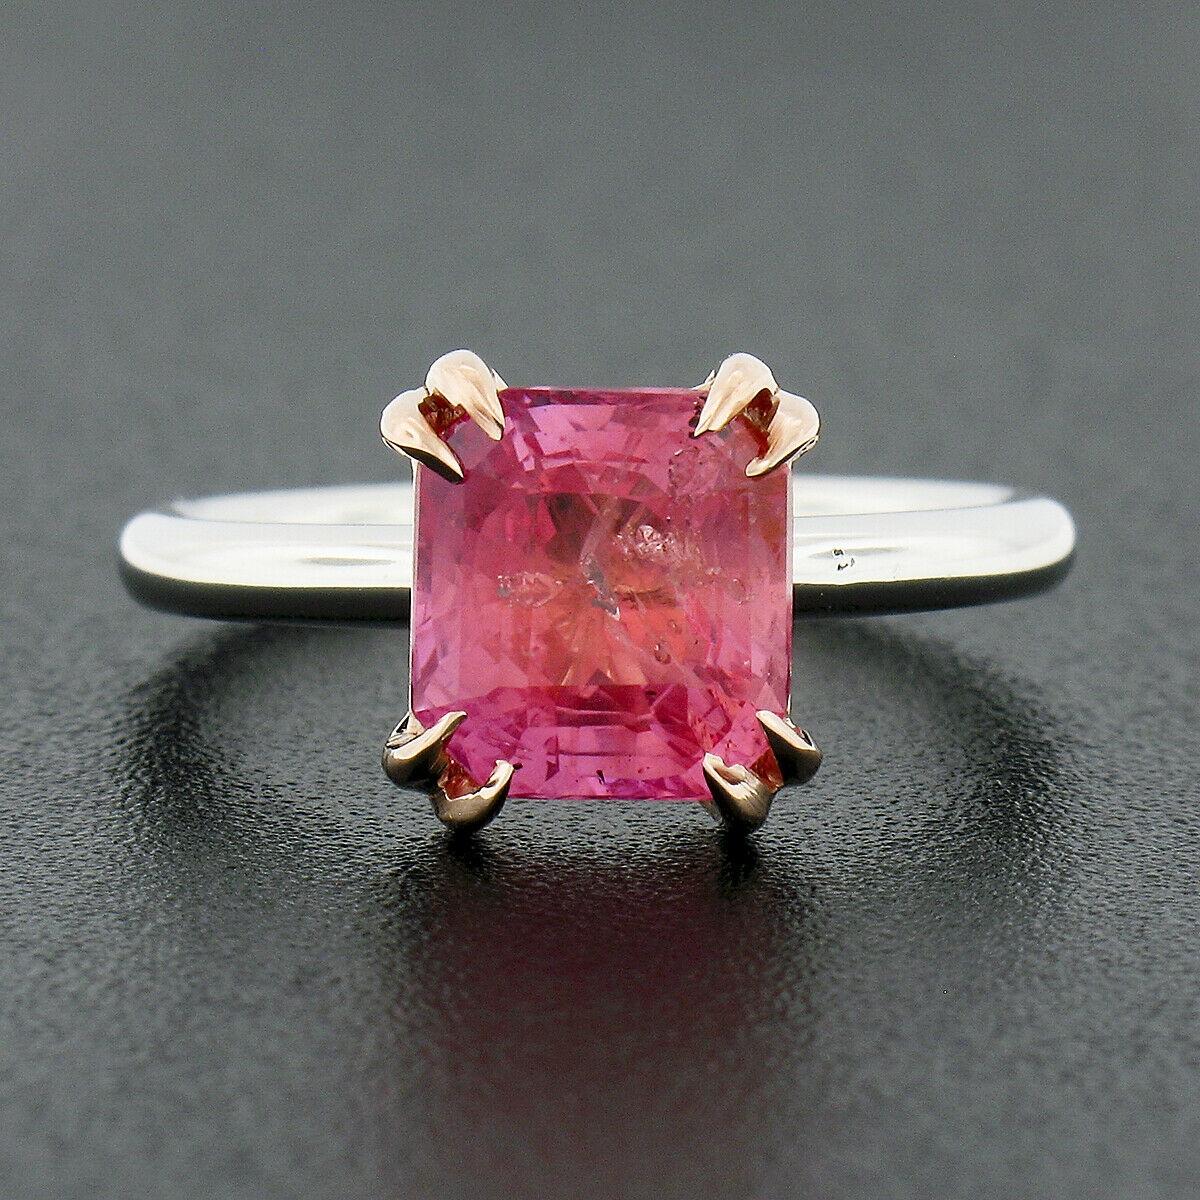 You are looking at an incredible and super rare Padparadscha sapphire solitaire ring, that is custom designed and newly crafted in solid platinum with a 14k rose gold head. The magnificent, AGL certified, sapphire is neatly and professionally dual